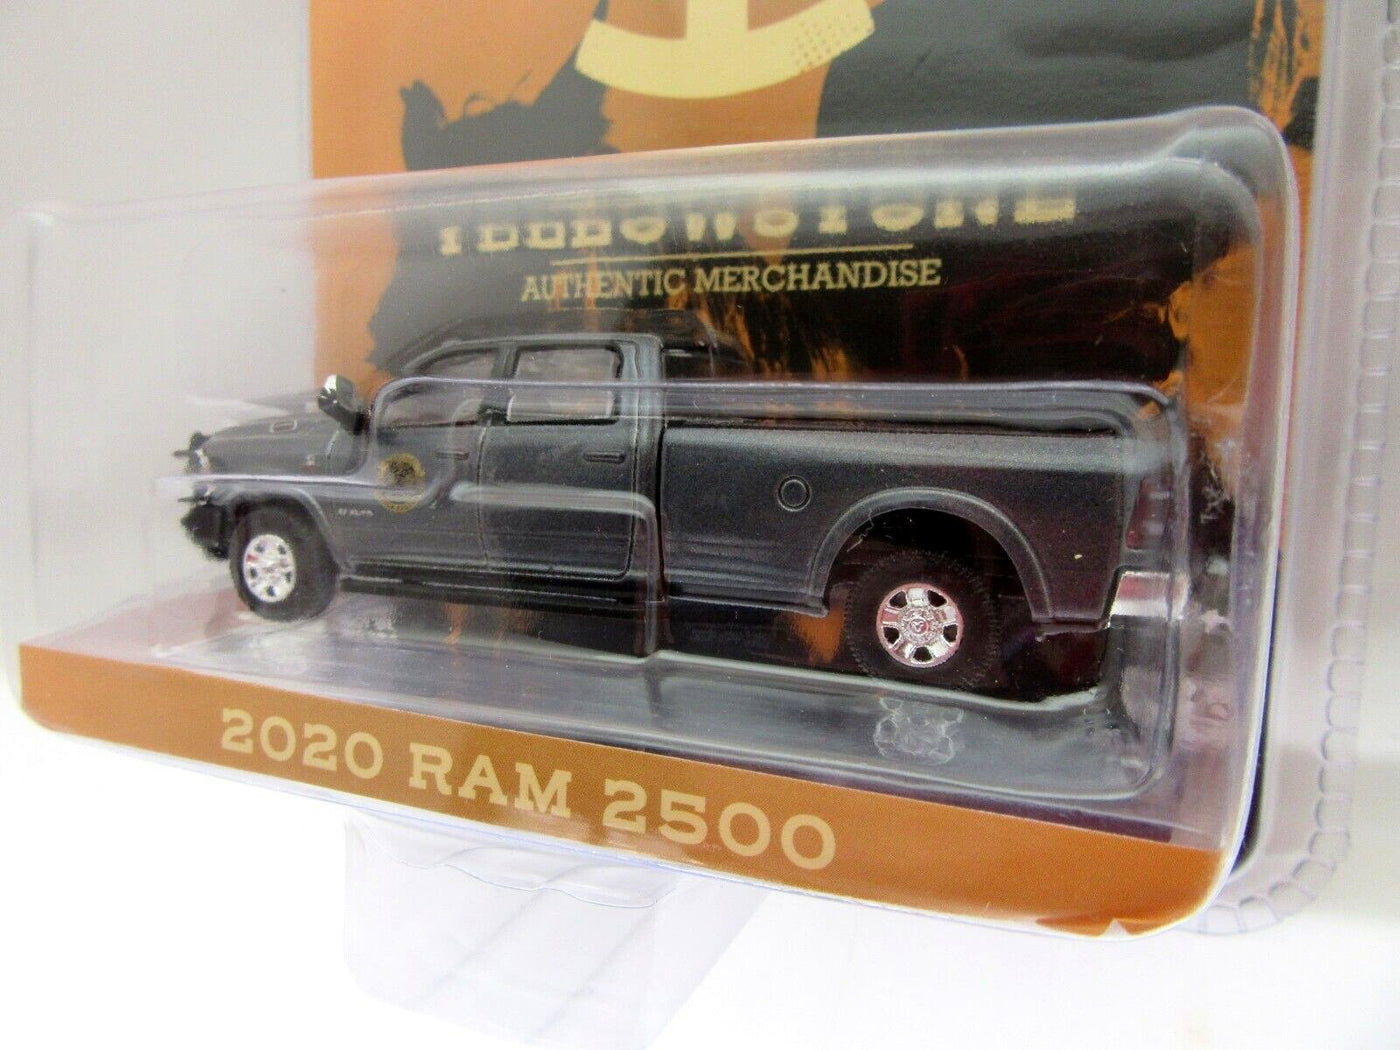 Greenlight Collectables Hollywood Yellowstone 2020 Ram 2500 Die Cast